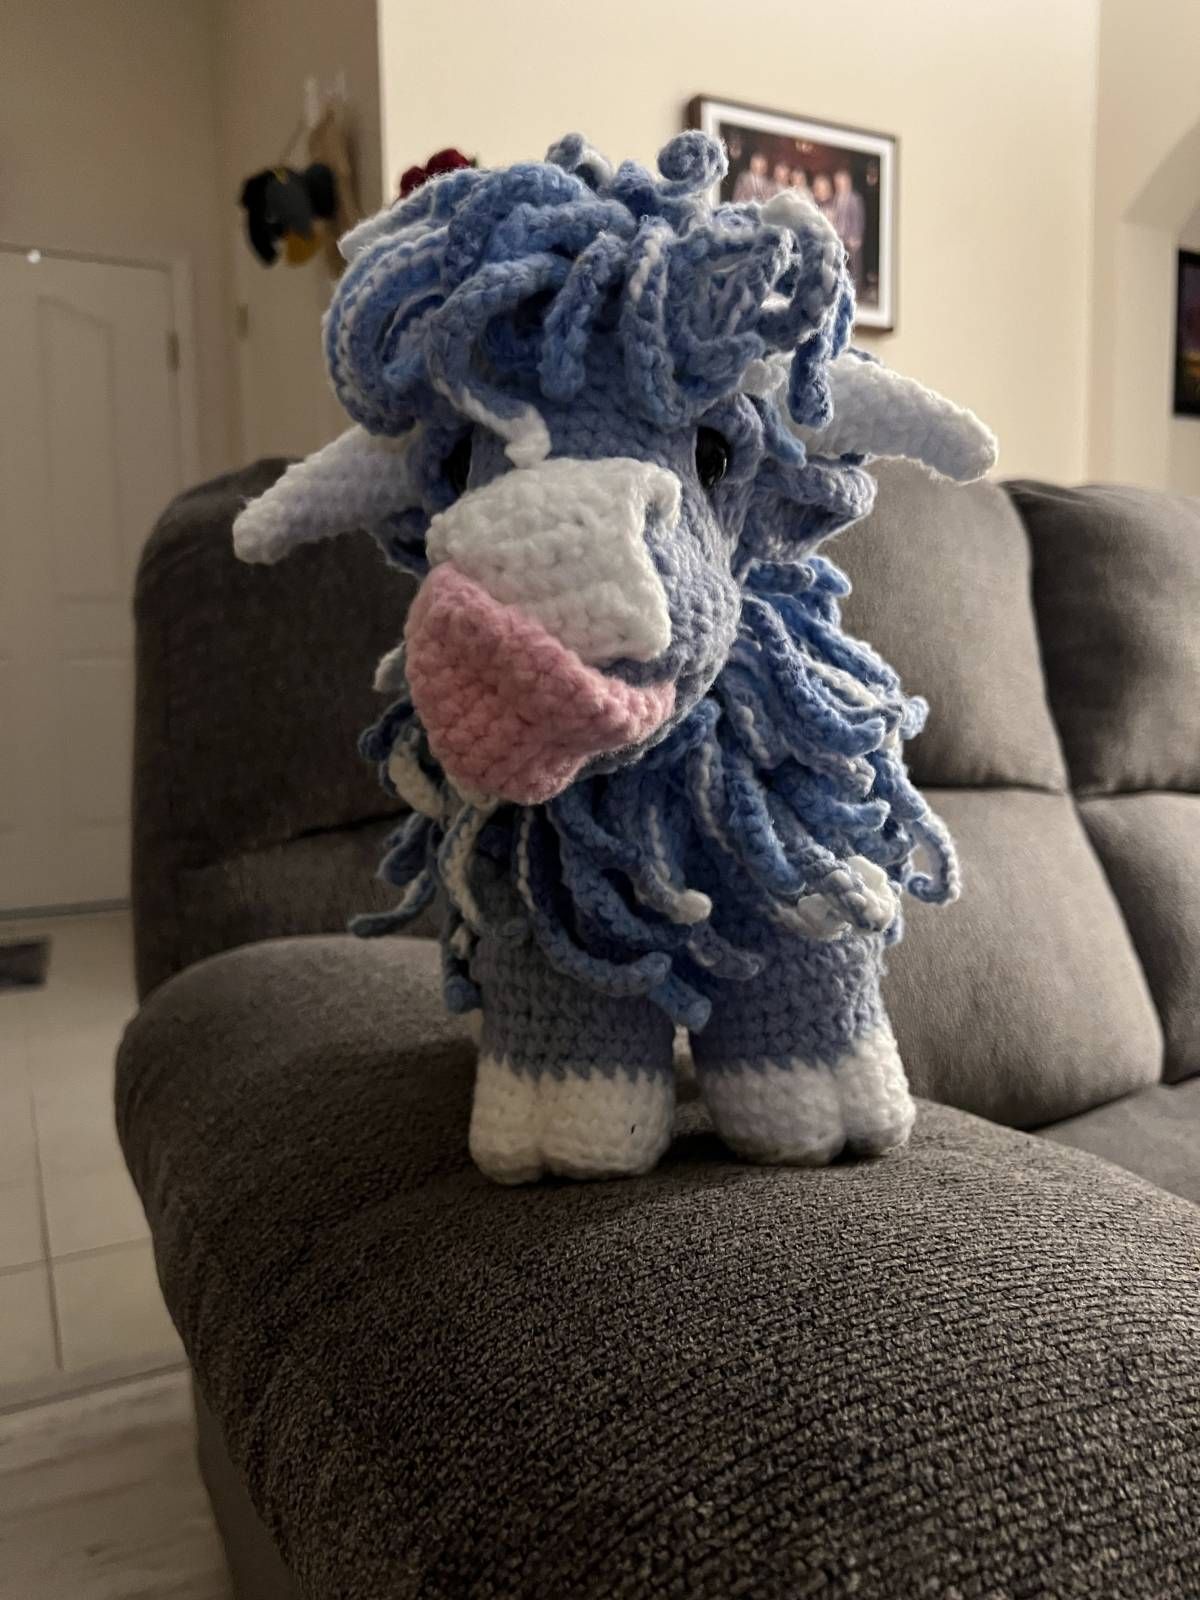 Amigurumi Highland Crochet Cow Pattern Review by Sandy for Cottontail Whiskers